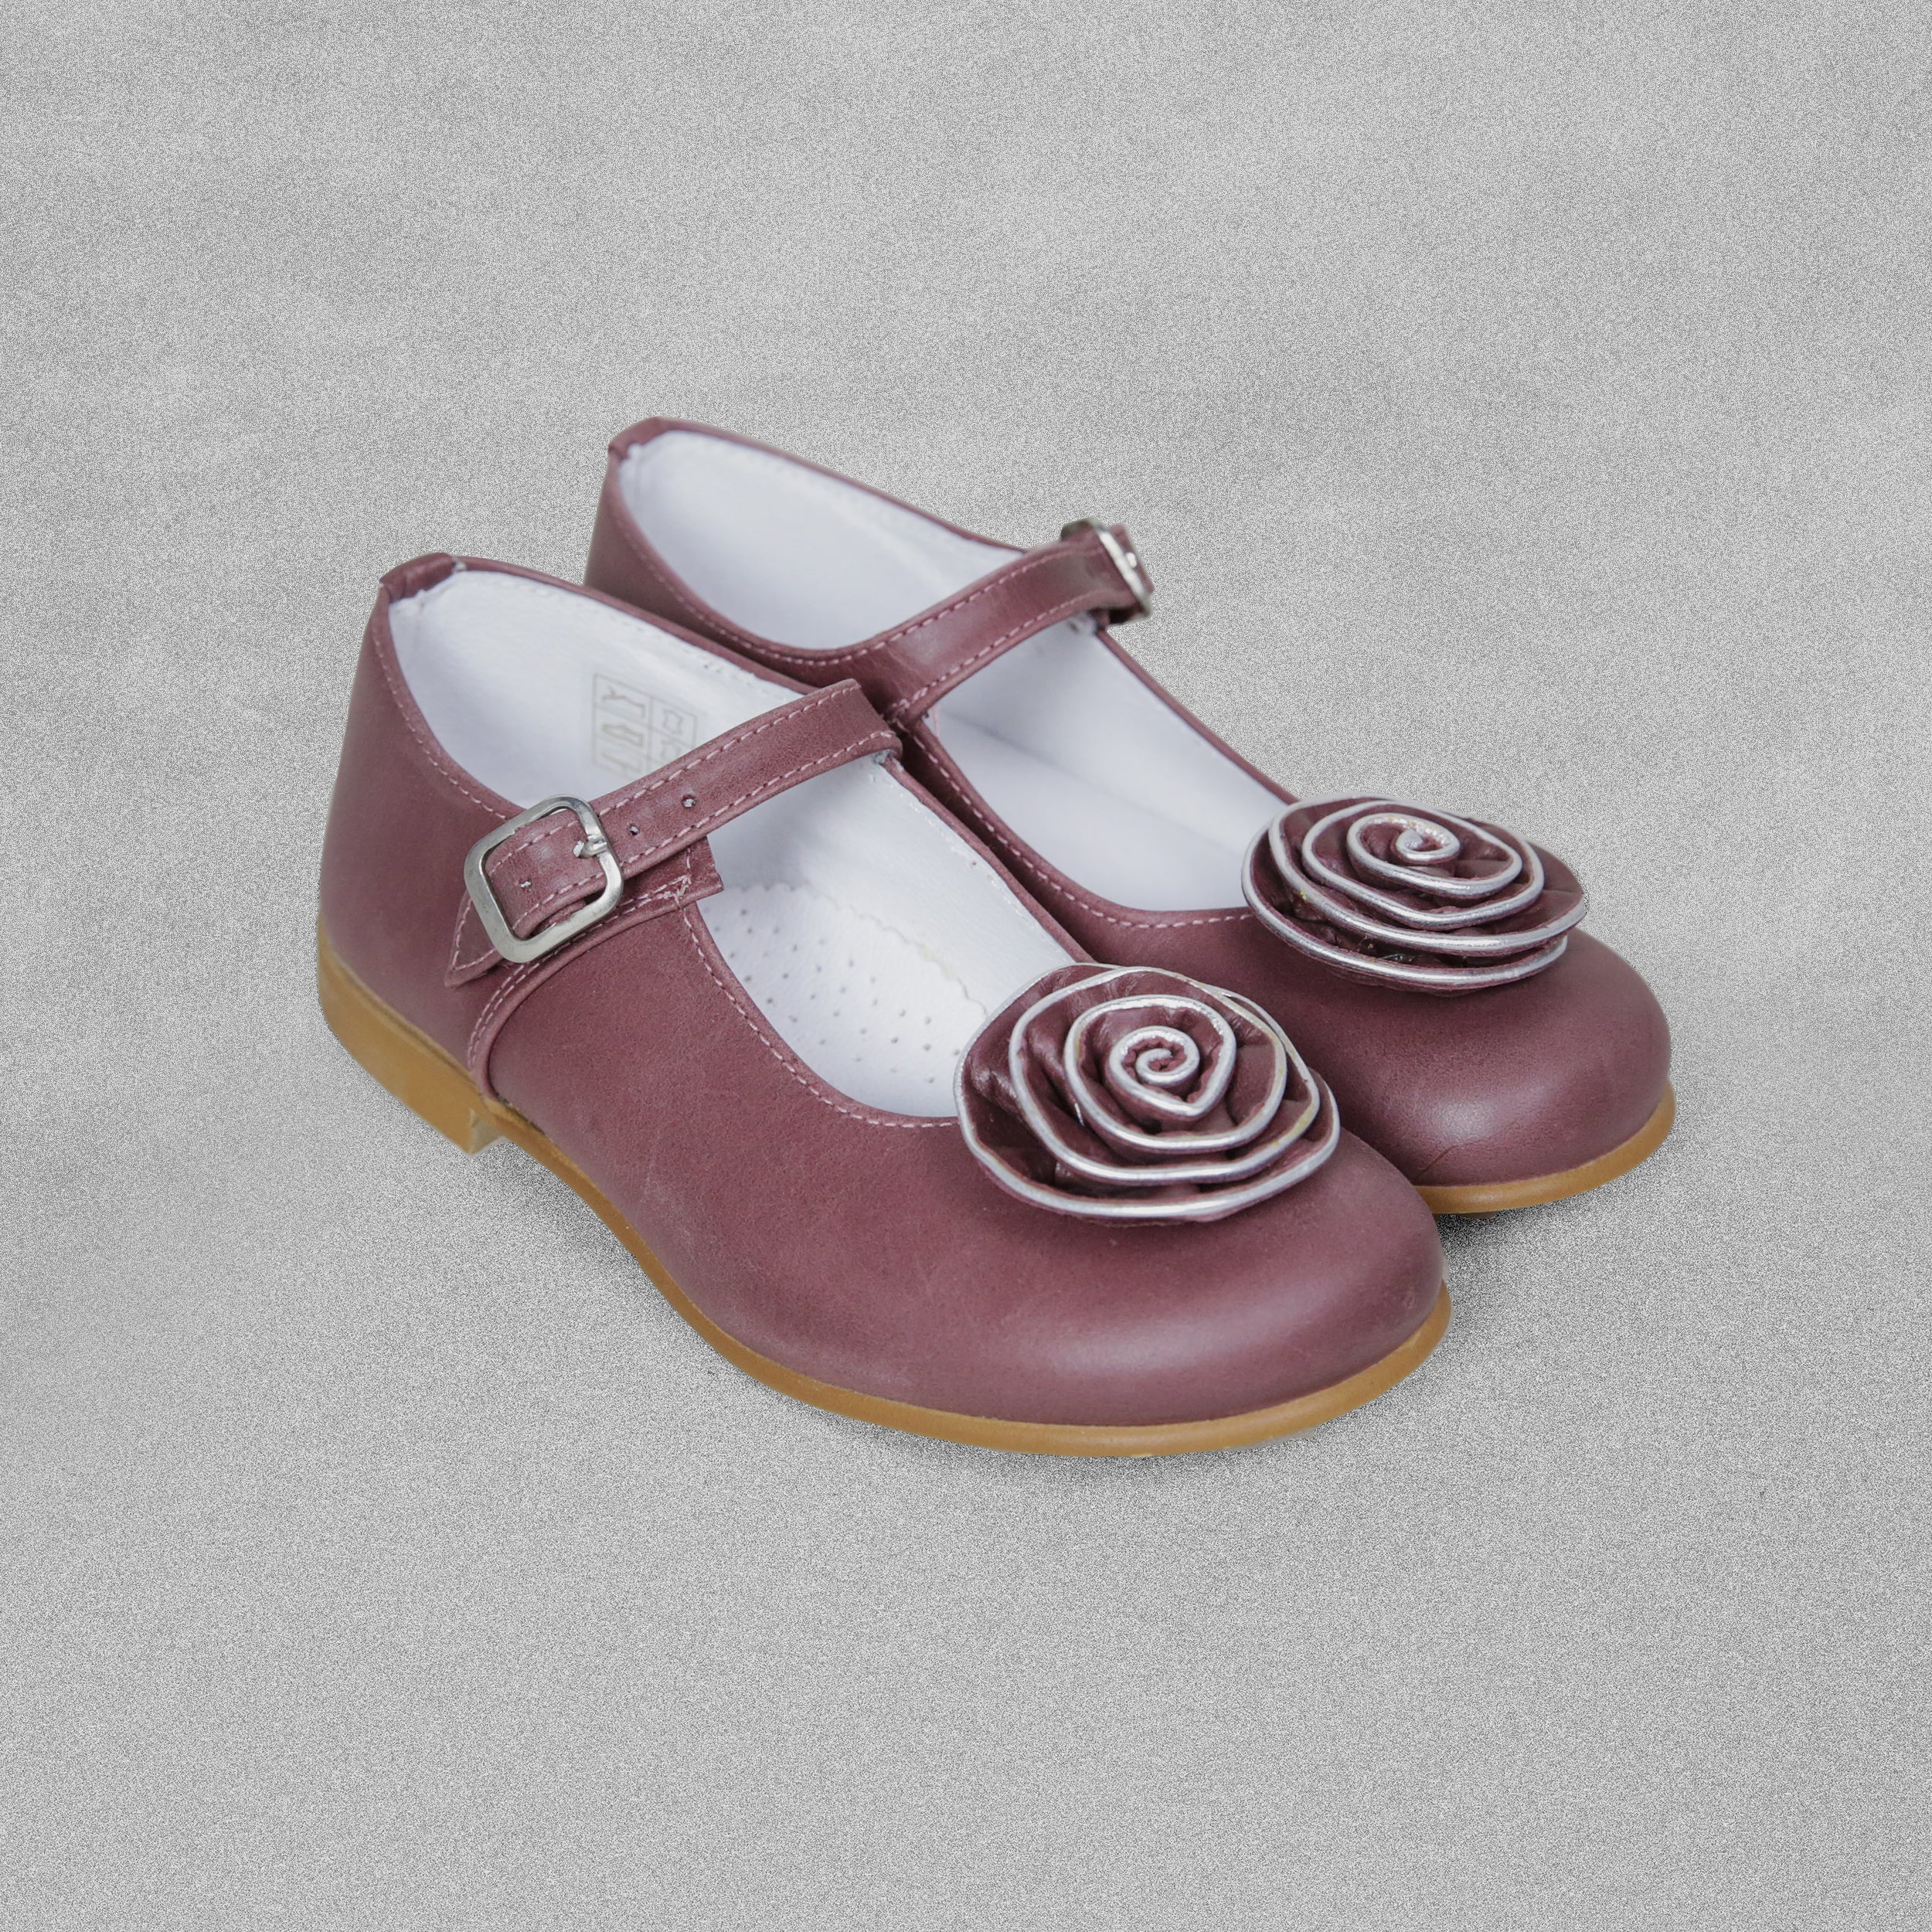 Shoeting Stars Plum Shoes with Buckle Strap & Flower